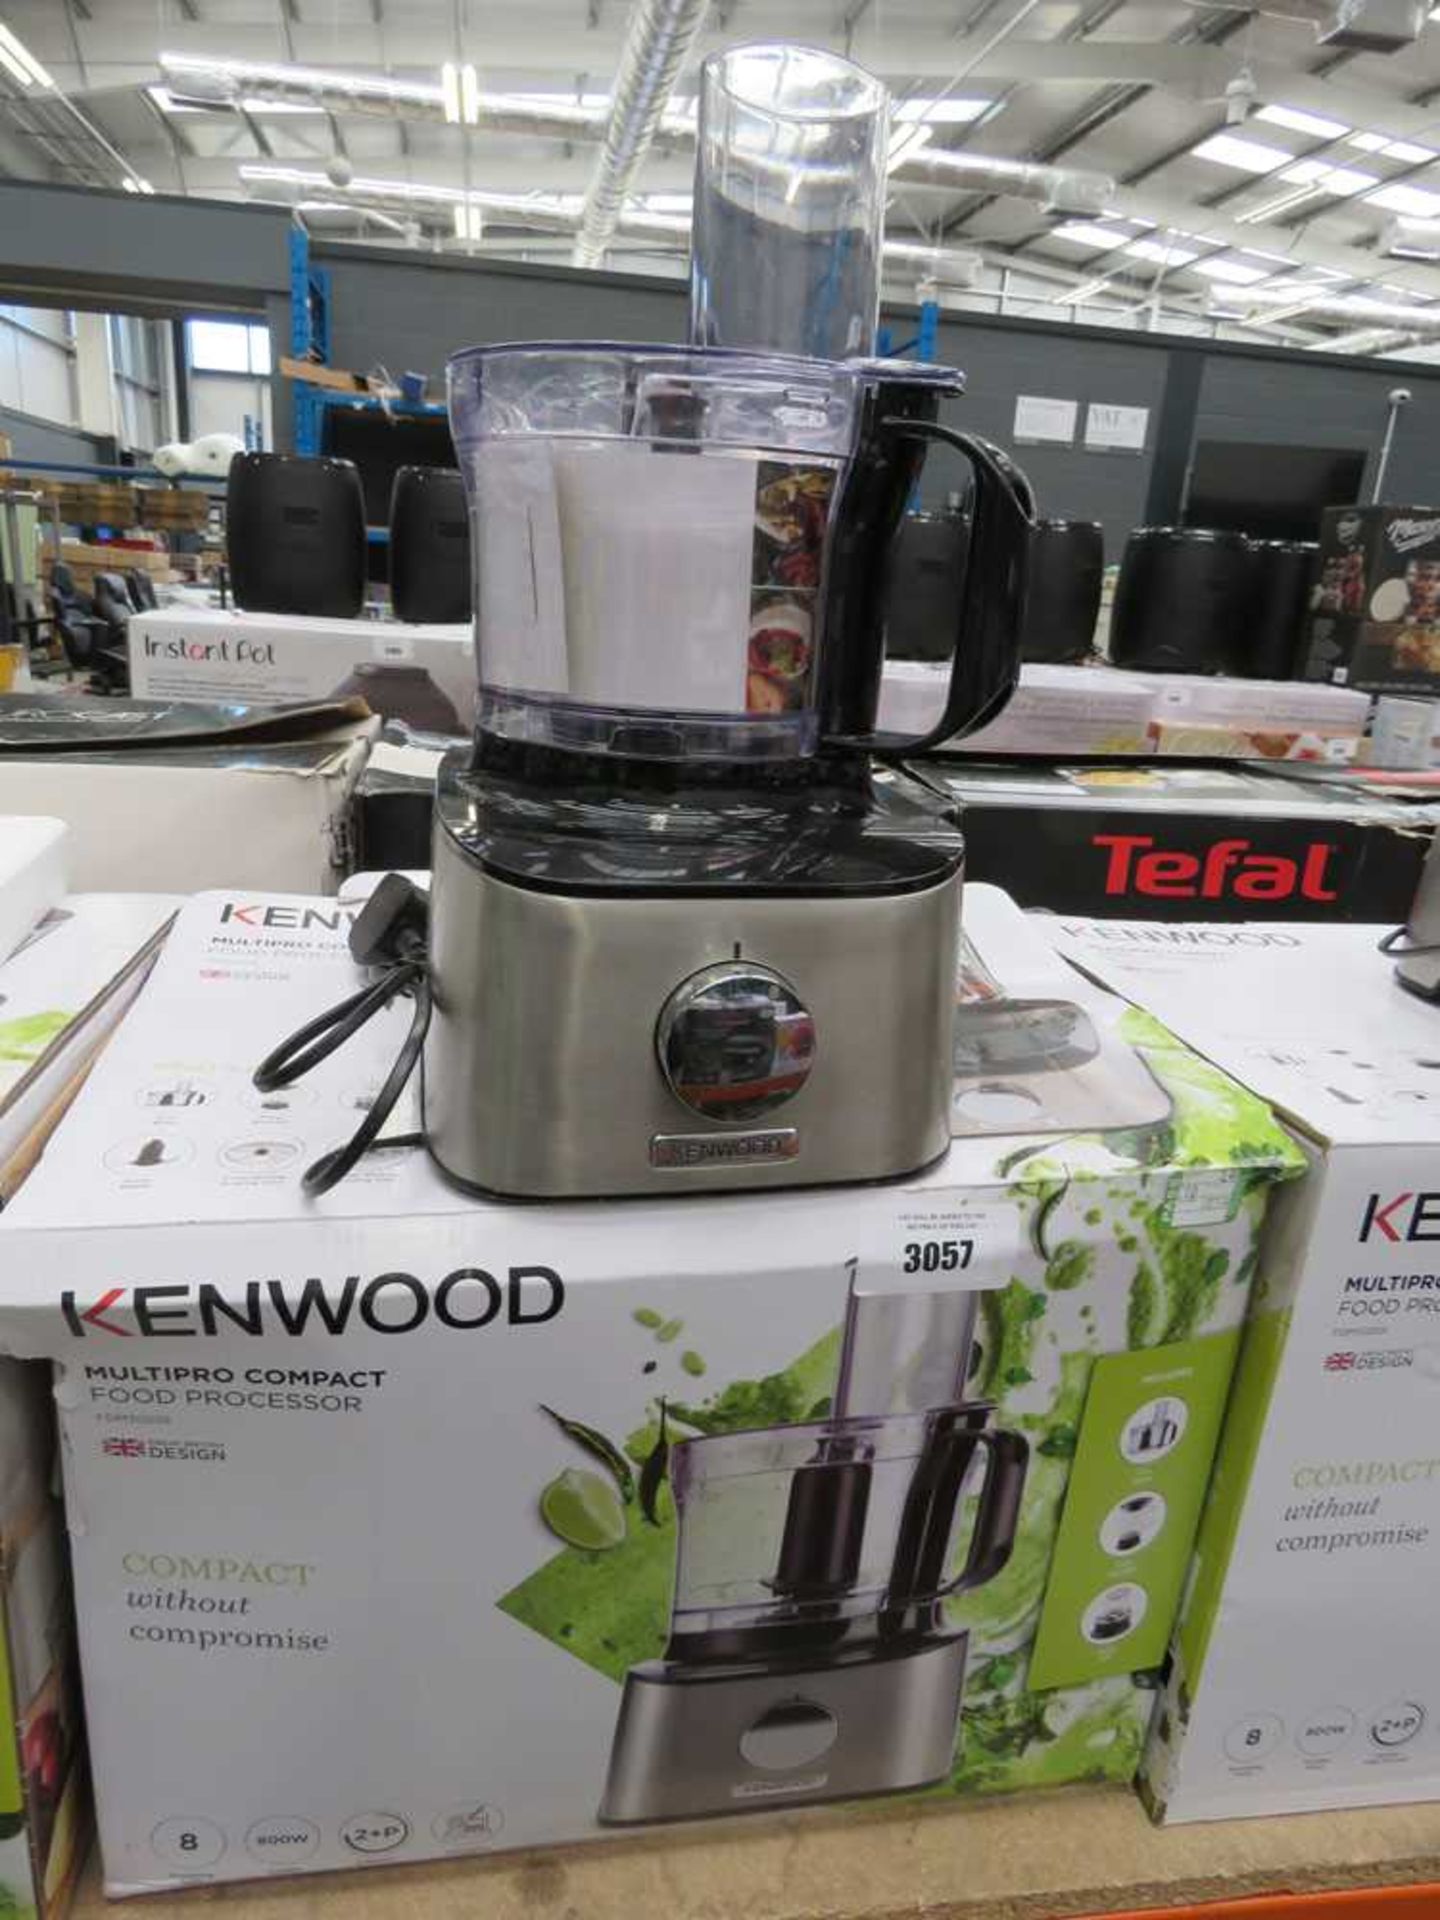 +VAT Kenwood Multi Pro compact food processor with box